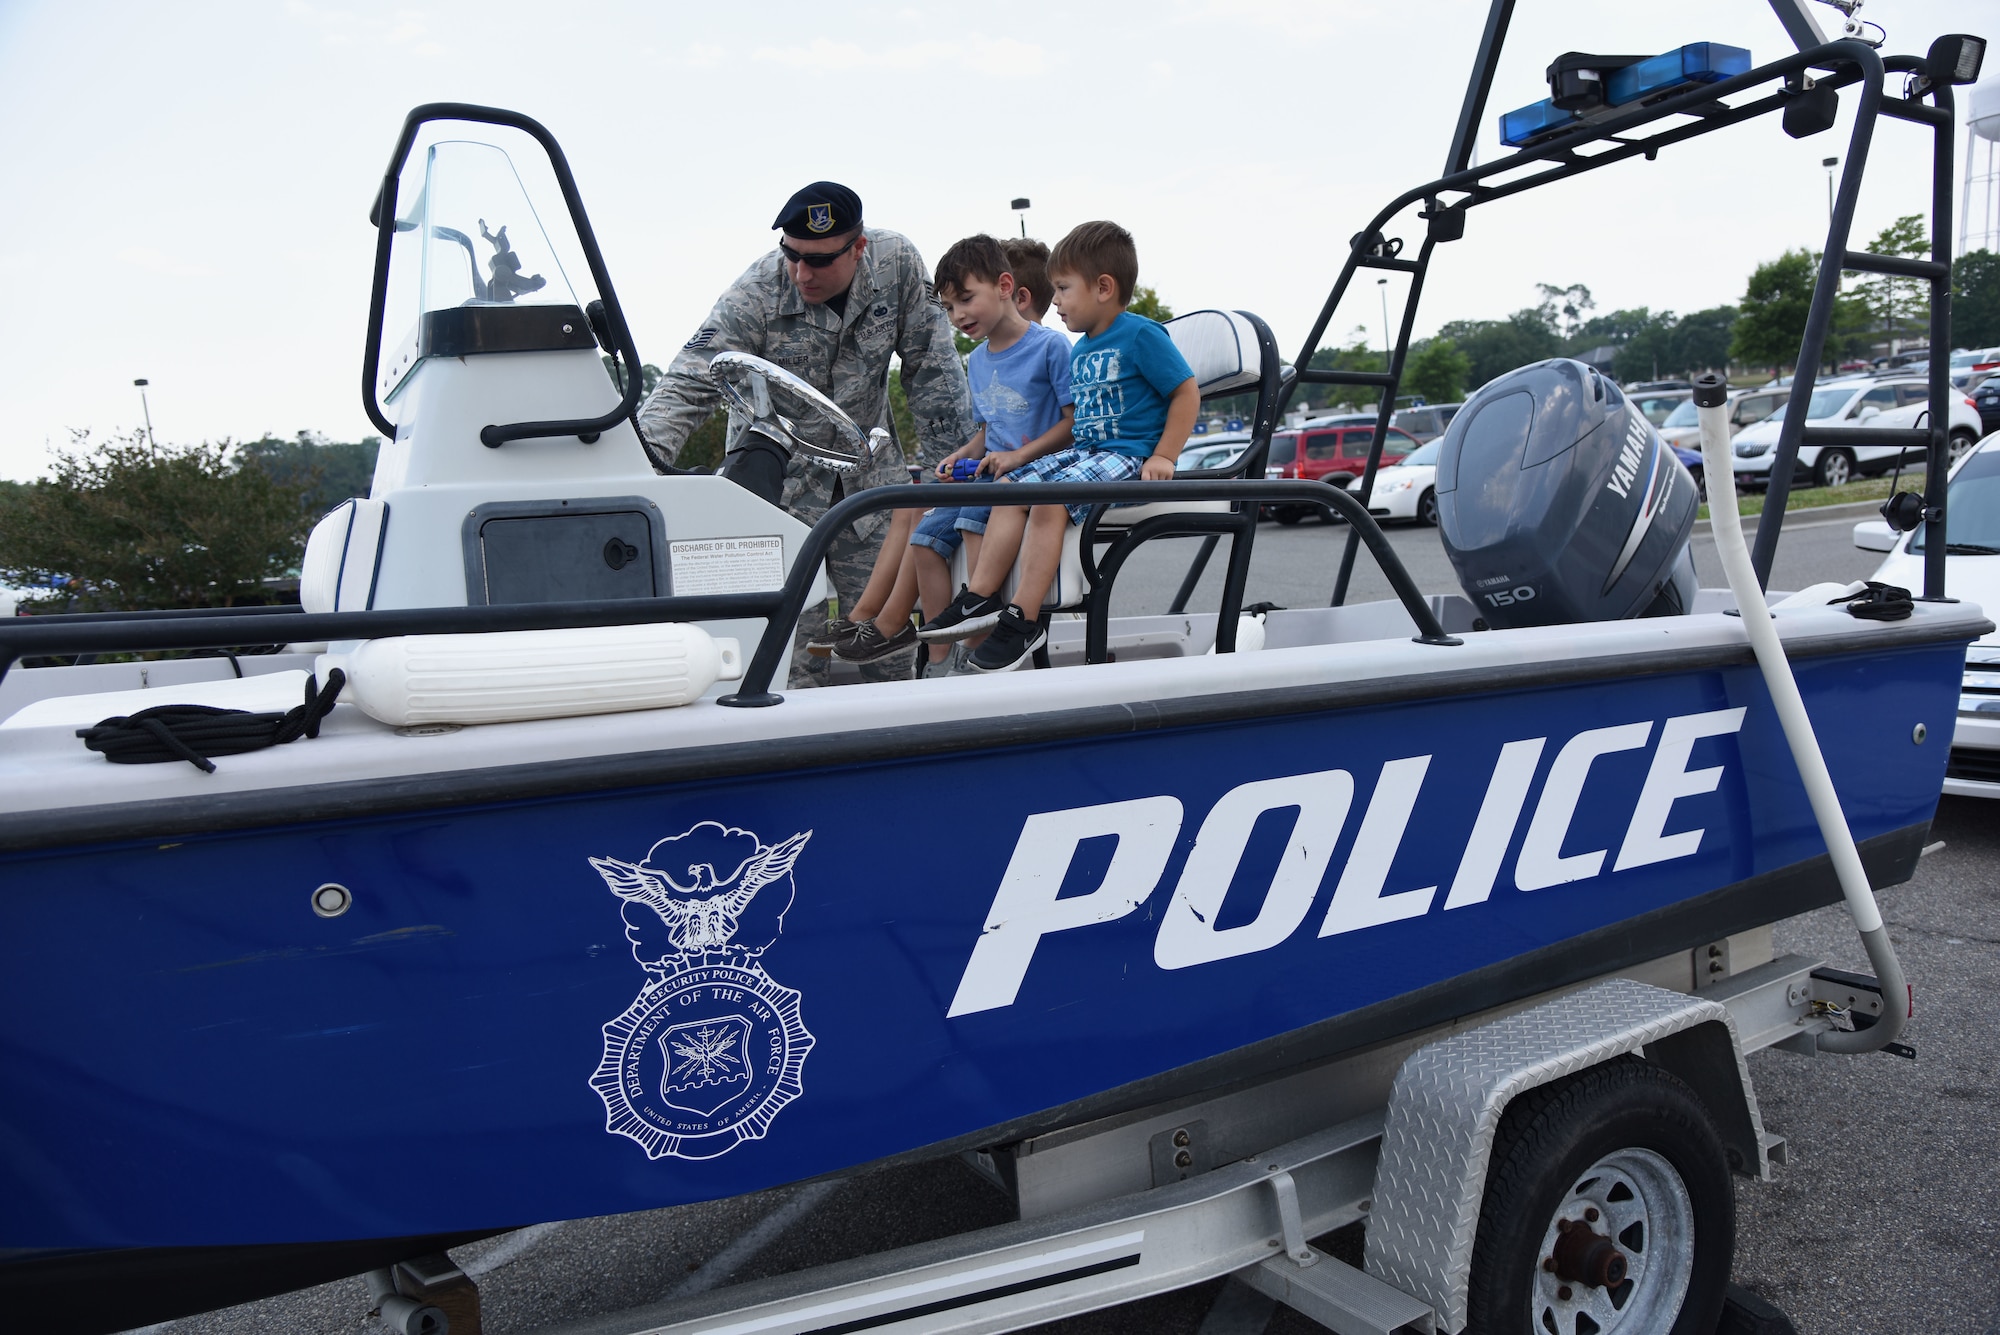 U.S. Air Force Tech. Sgt. Jared Miller, 81st Security Forces Squadron unit deployment manager, gives a tour of the 81st SFS patrol boat to kids during the 81st SFS fun day at the base exchange at Keesler Air Force Base, Mississippi, May 18, 2018. Fun day allowed individuals to view a military working dog demonstration, a combat arms weapons stand as well as tour SFS vehicles and equipment. The event was held during National Police Week, which recognizes the service of law enforcement men and women who put their lives at risk every day. (U.S. Air Force photo by Kemberly Groue)